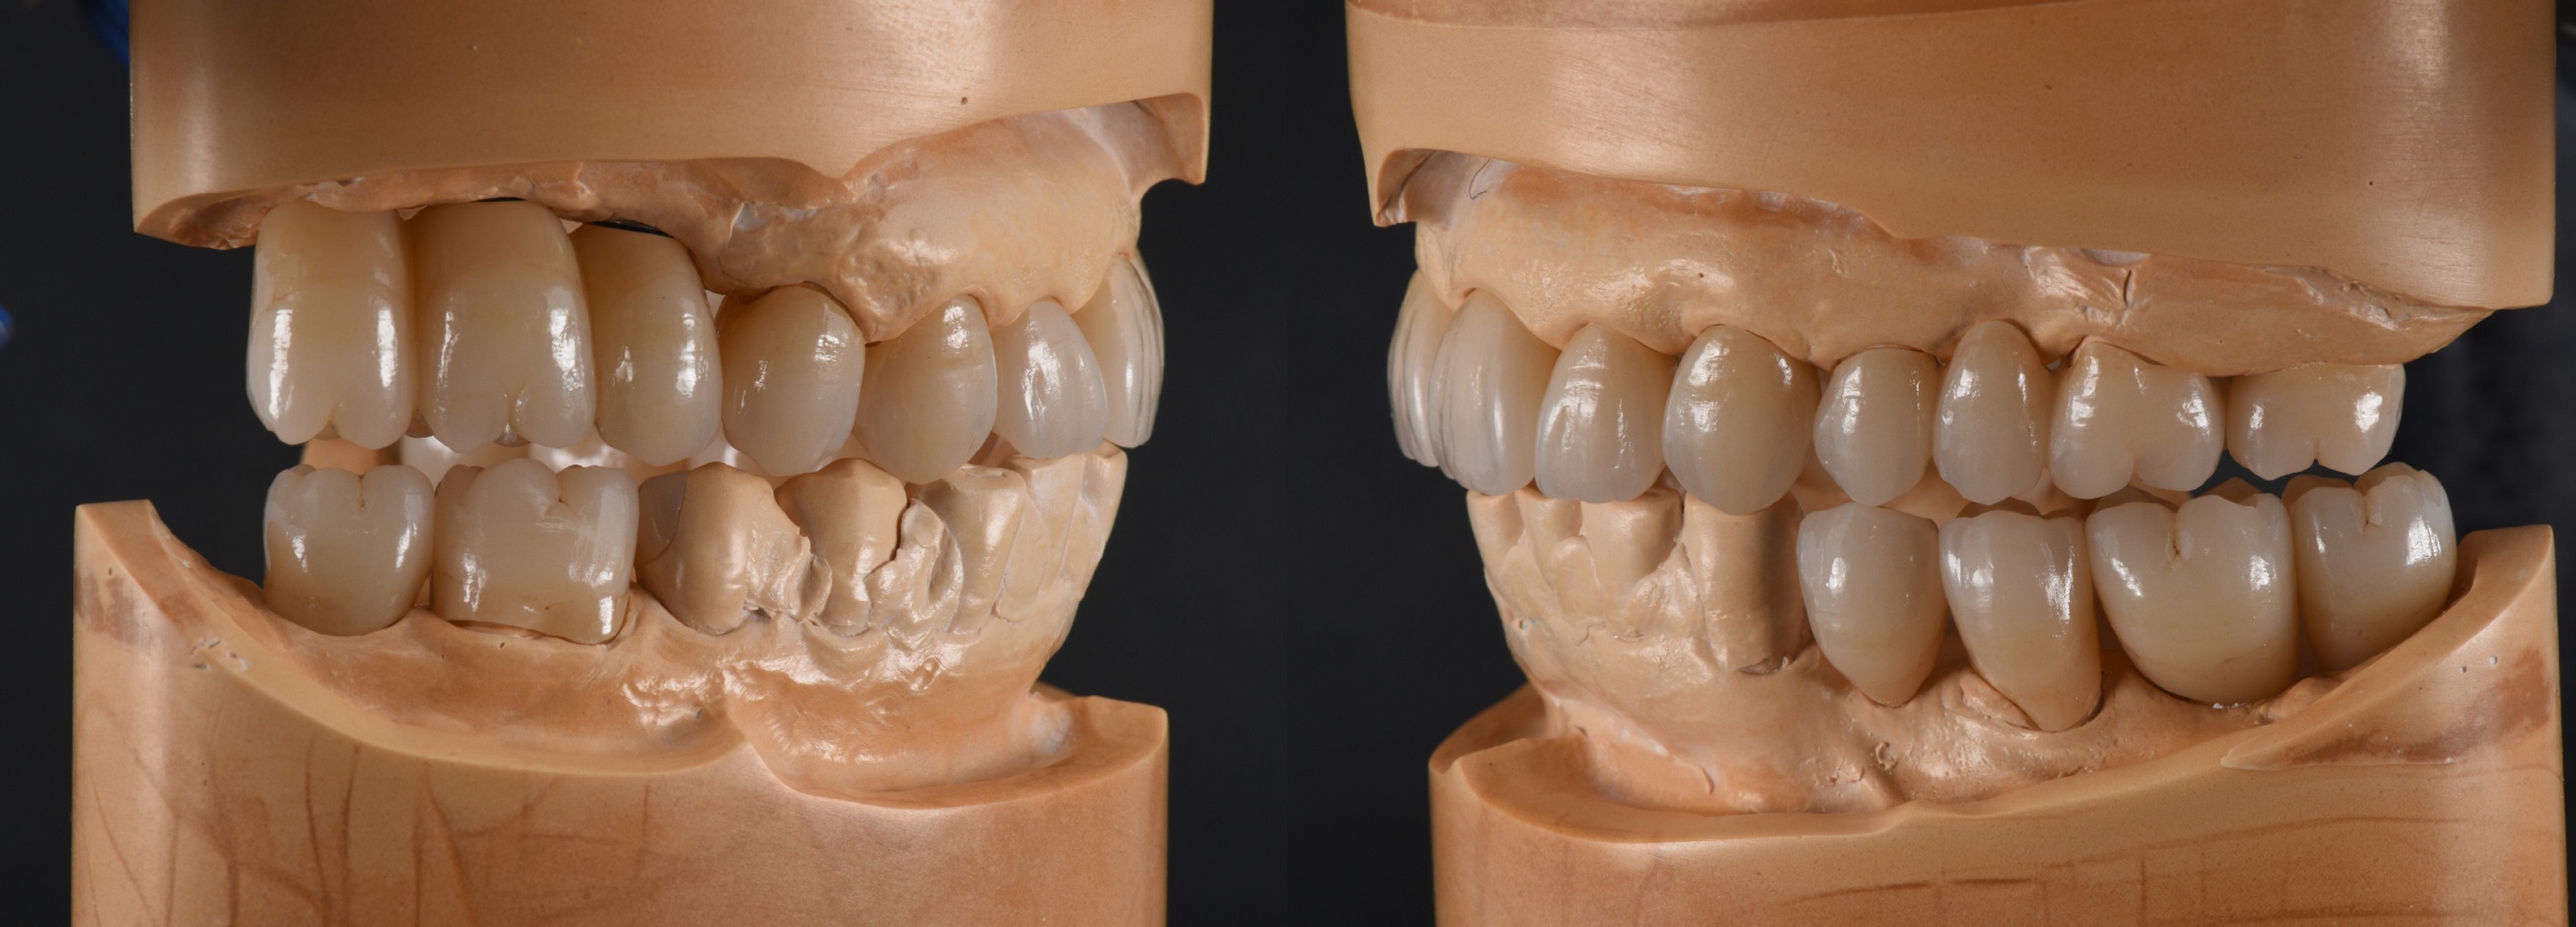 Figs. 9a & b: The perfect occlusal surfaces and canine guidance control during jaw movement.